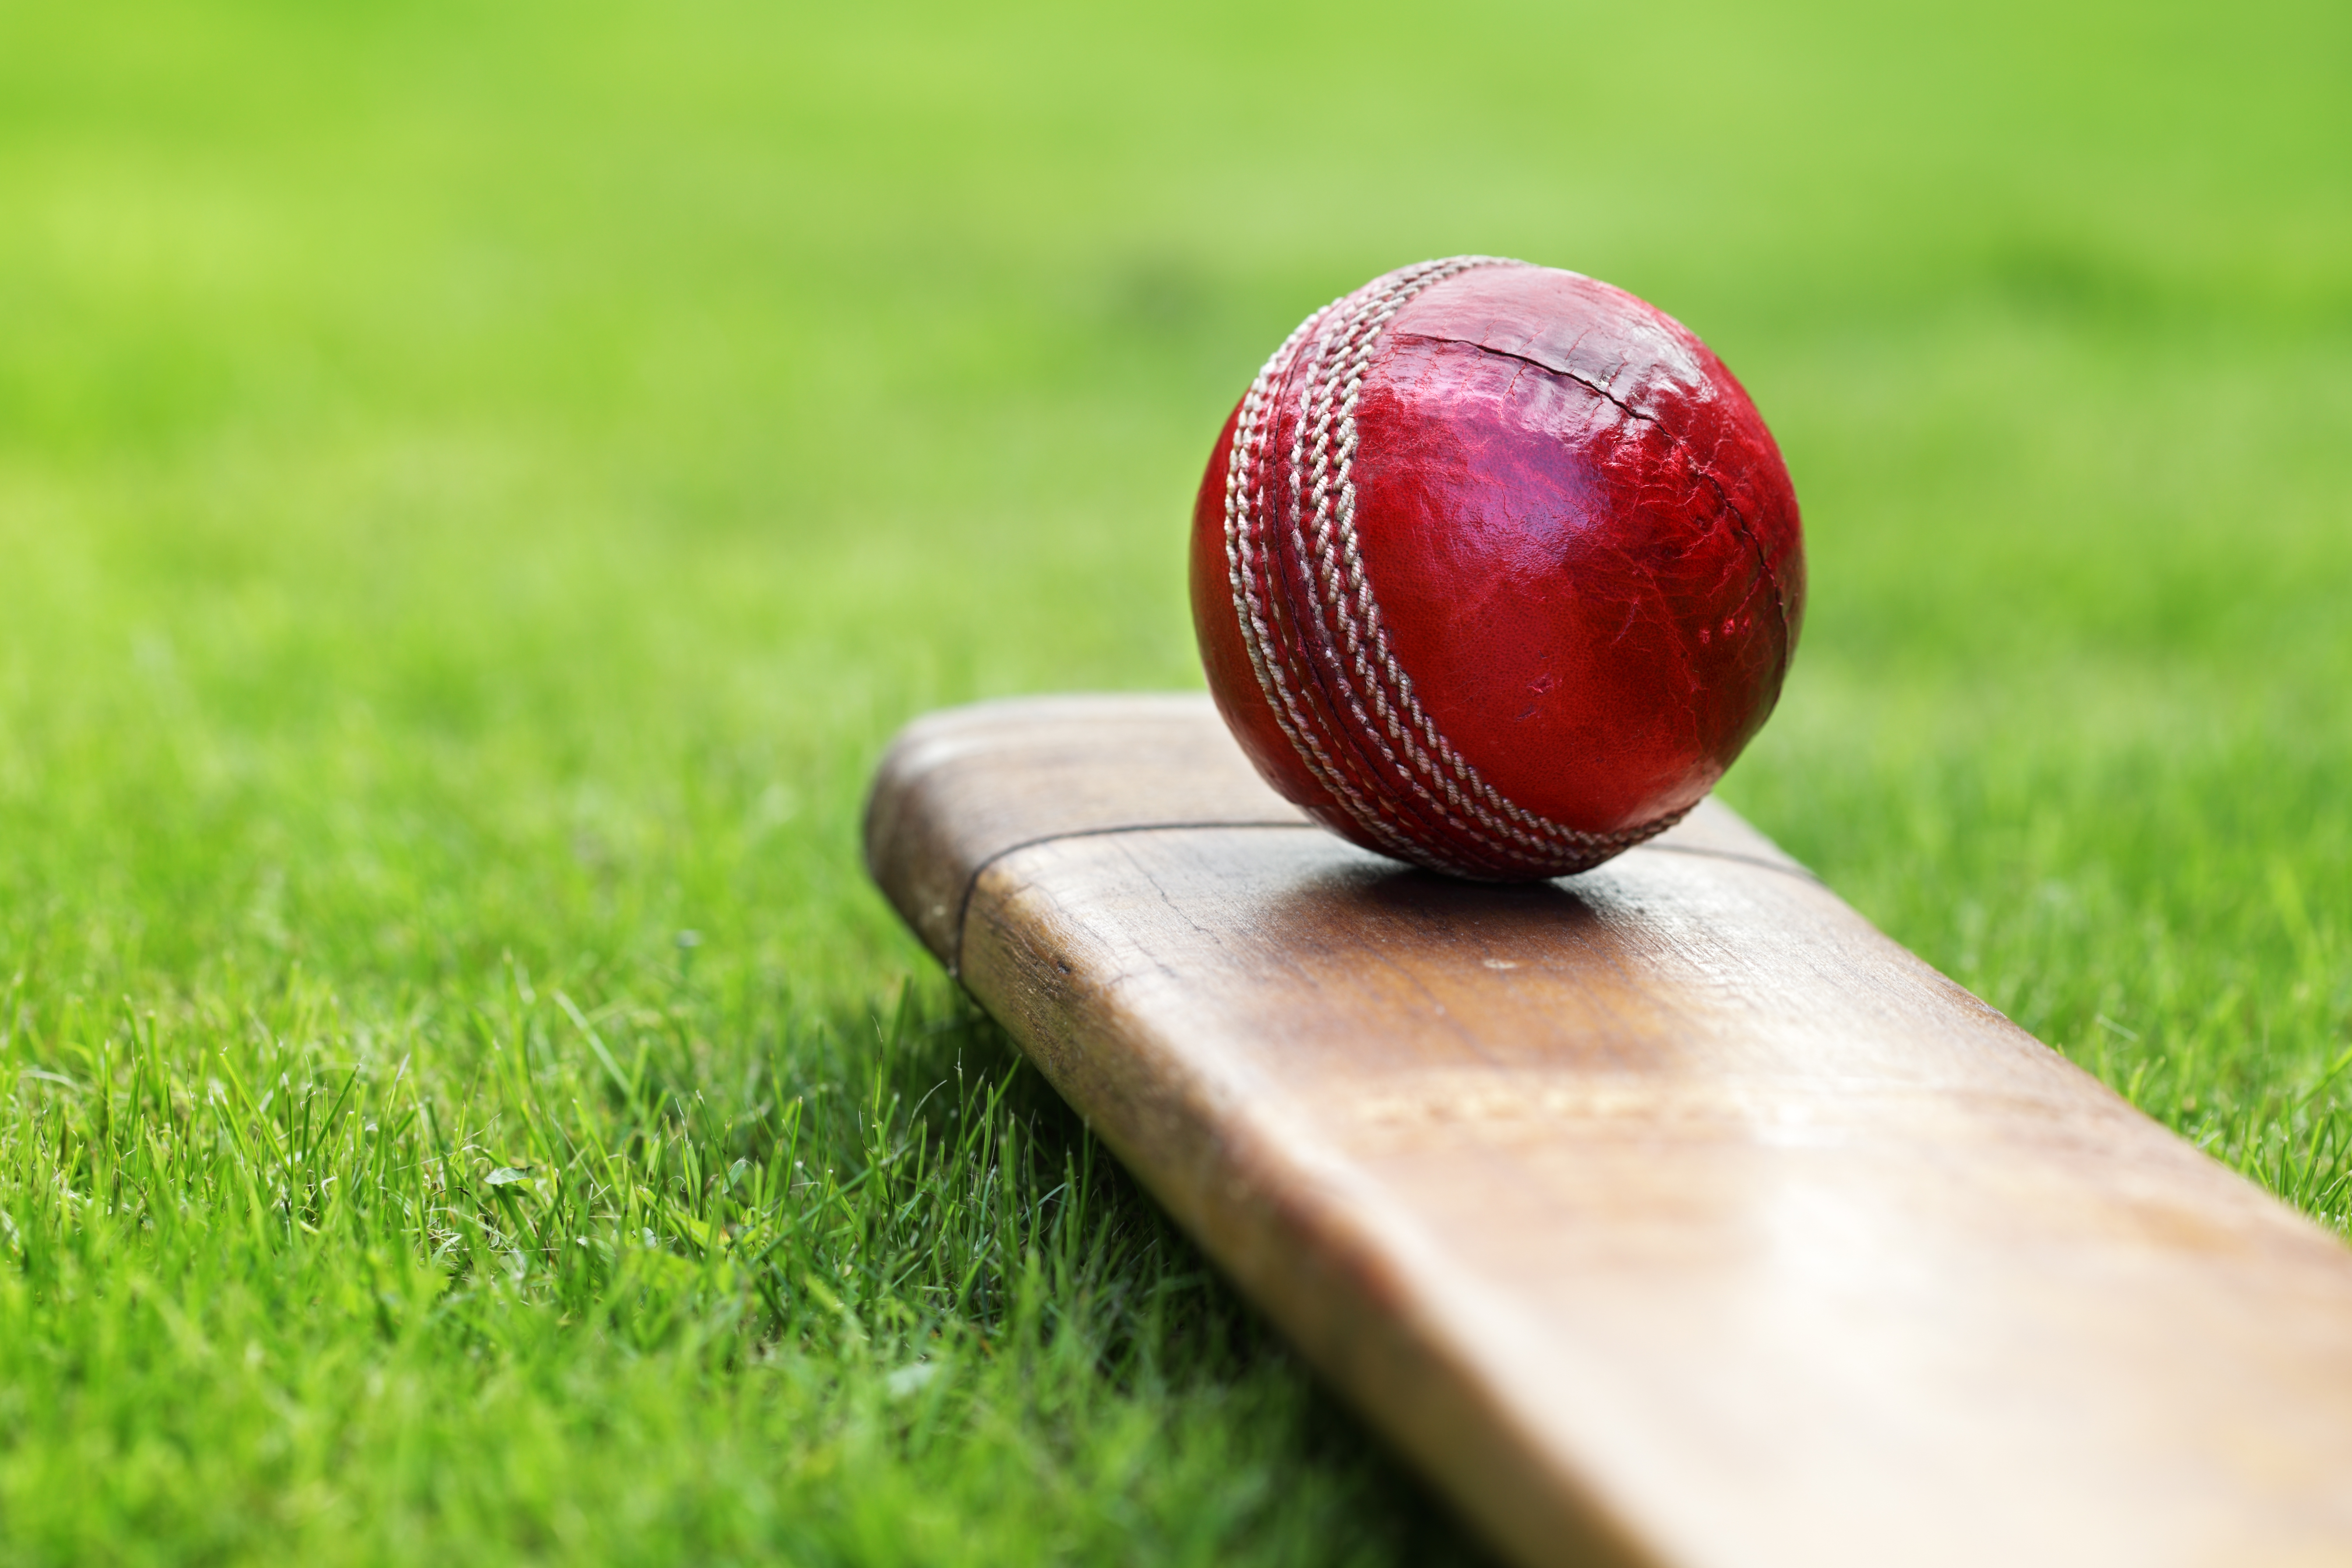 Tamil Nadu Cricket Association (TNCA)’s new constitution has been deemed “non compliant” on 21 counts, Haryana Cricket Association (HCA) and Maharashtra Cricket Association (MCA) are also likely to fall in the same category